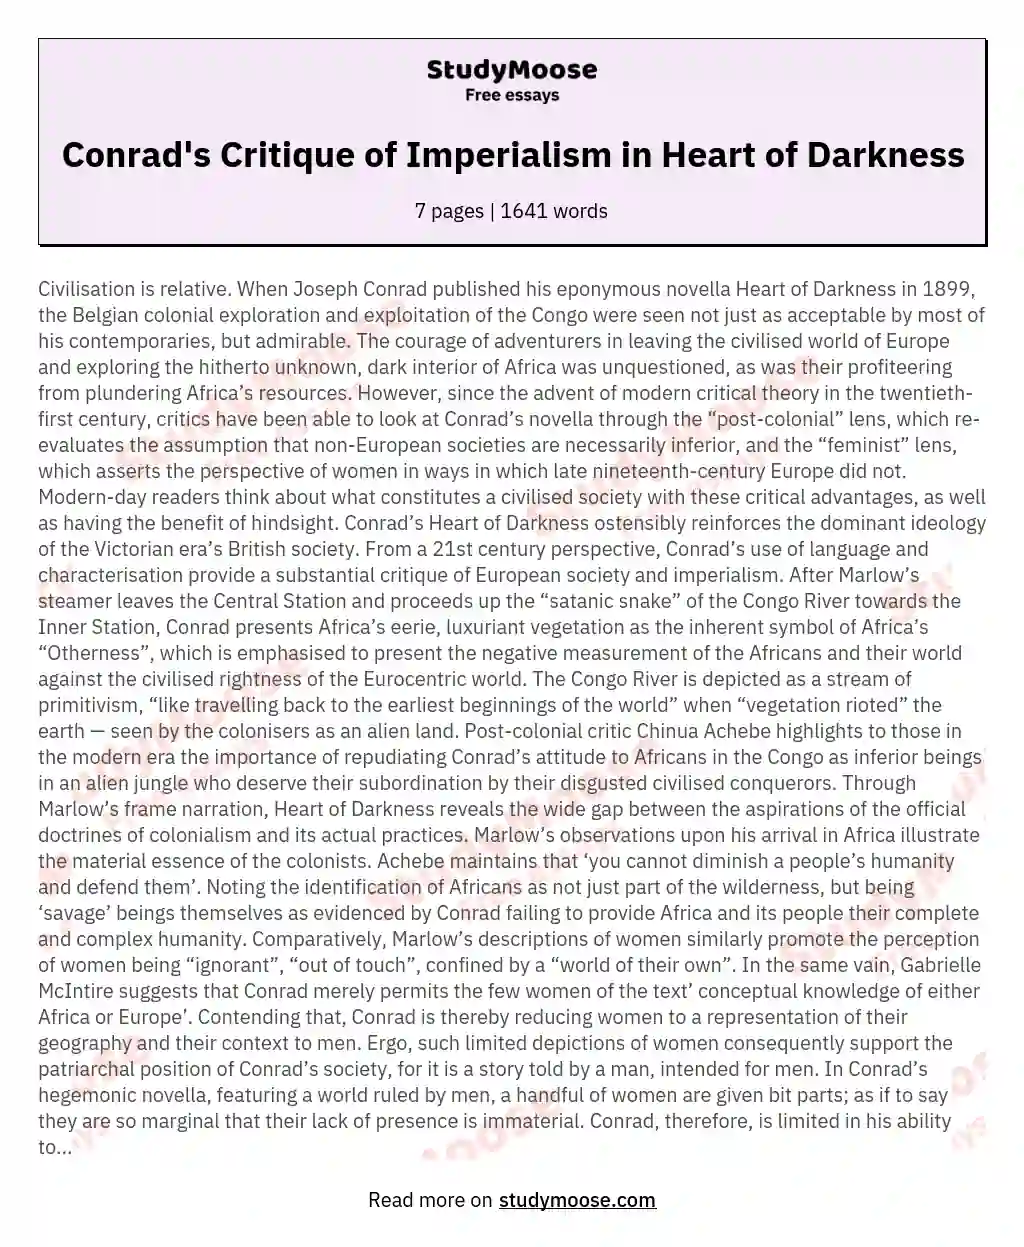 essay about imperialism in heart of darkness